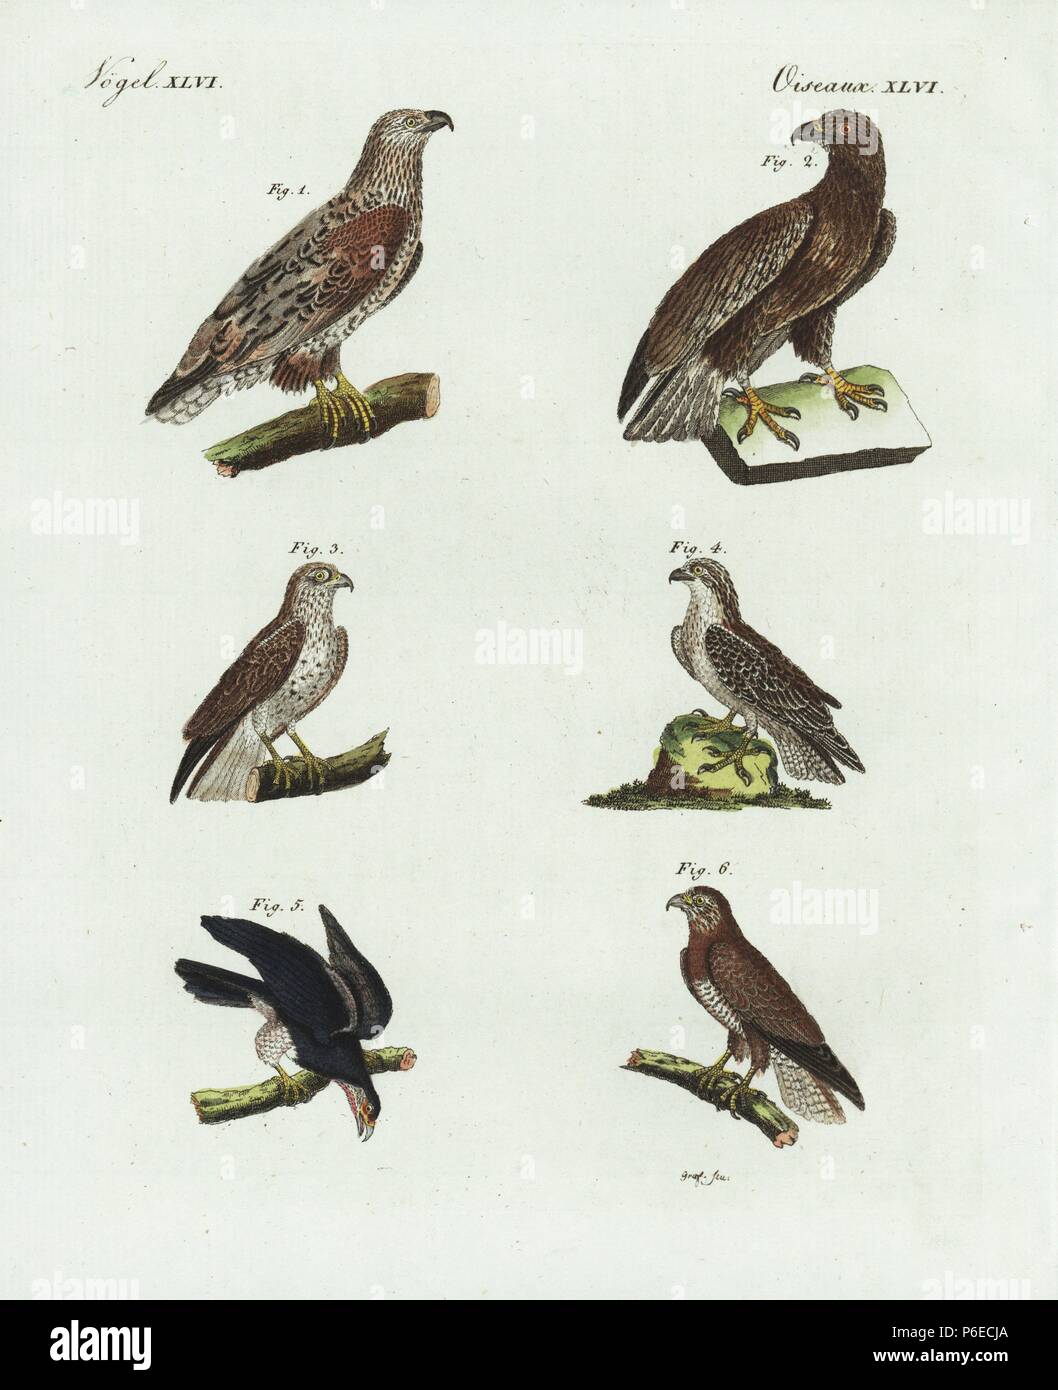 White-tailed sea eagle, Haliaeetus albicilla, male 1, female 2, short-toed snake-eagle, Circaetus gallicus 3, osprey, Pandion haliaetus 4, red-tailed hawk, Buteo jamaicensis 5, and buzzard, Buteo buteo 6. Handcoloured copperplate engraving by Graf from Bertuch's 'Bilderbuch fur Kinder' (Picture Book for Children), Weimar, 1798. Friedrich Johann Bertuch (1747-1822) was a German publisher and man of arts most famous for his 12-volume encyclopedia for children illustrated with 1,200 engraved plates on natural history, science, costume, mythology, etc., published from 1790-1830. Stock Photo